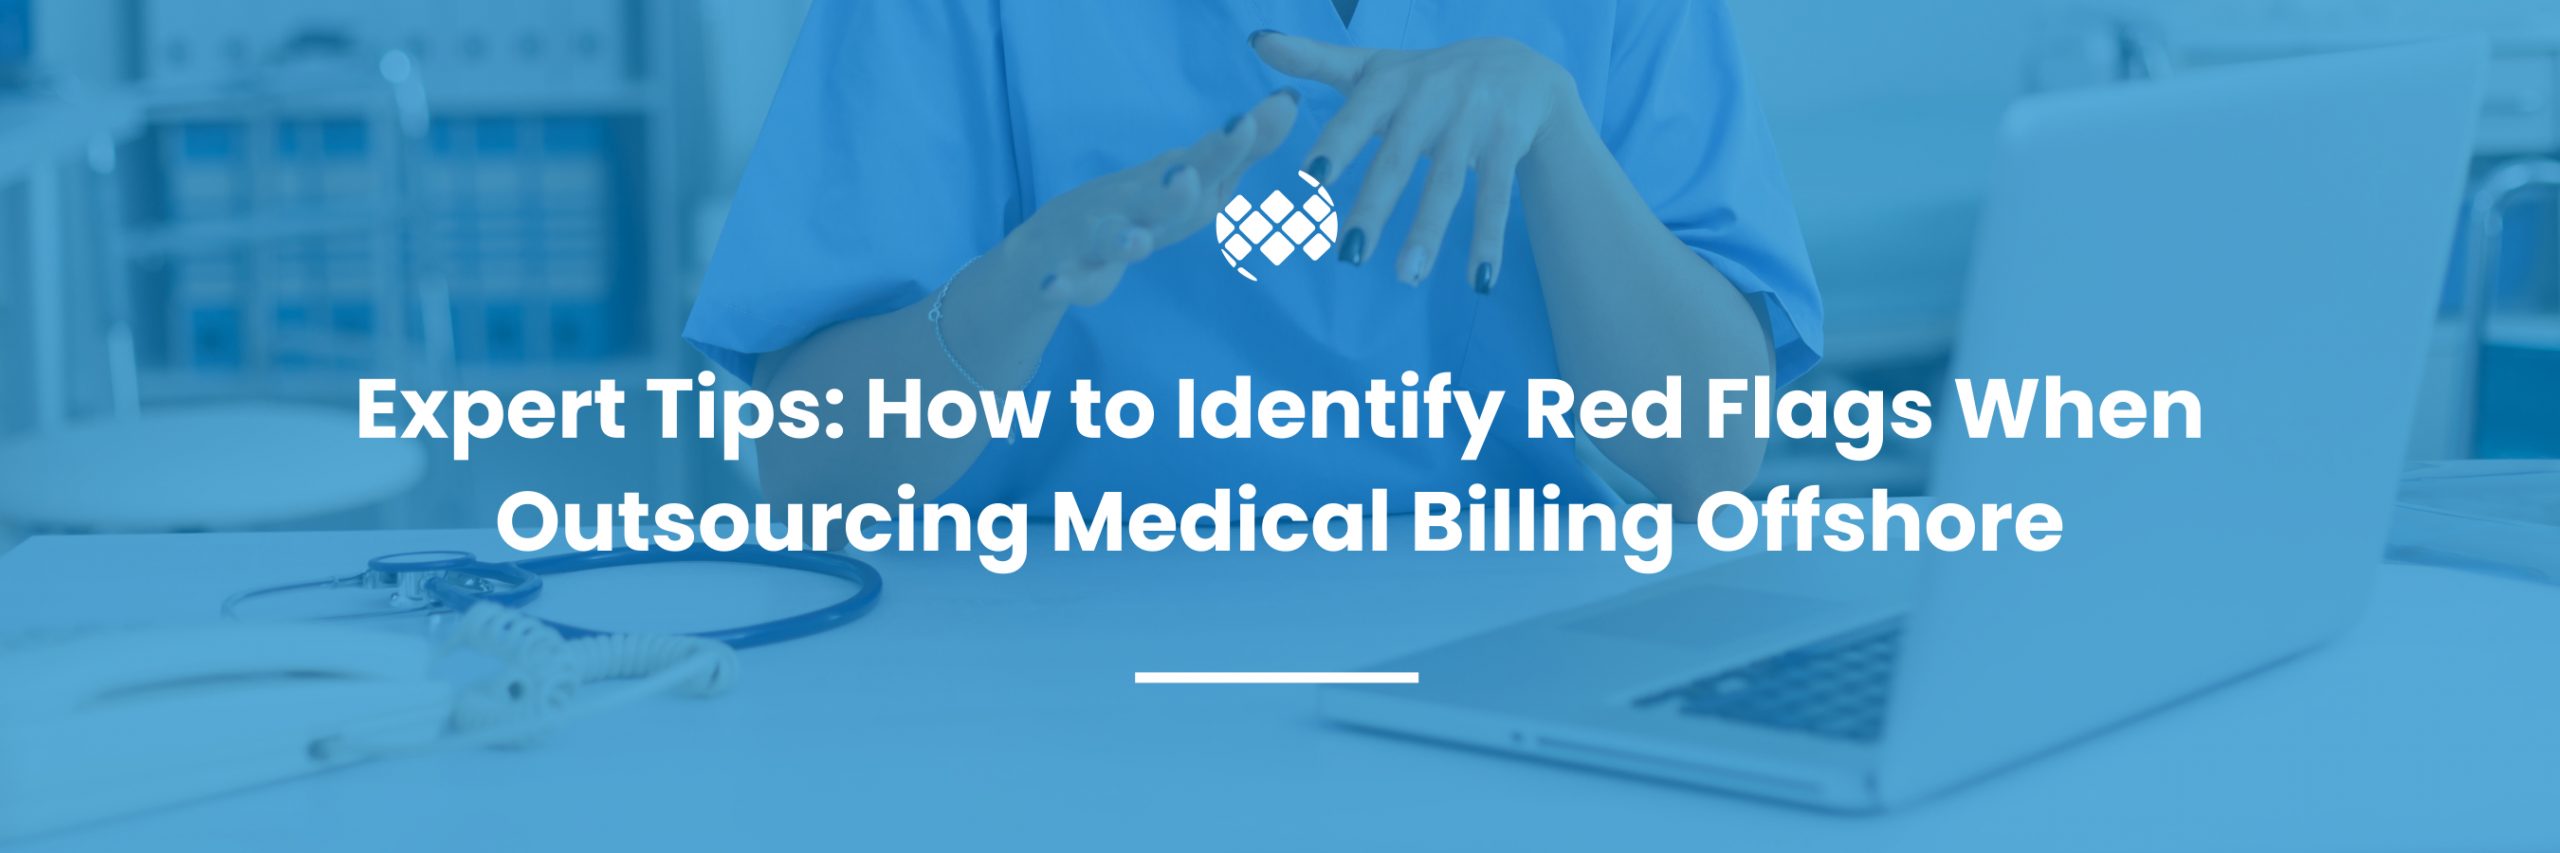 offshore outsourcing medical billing